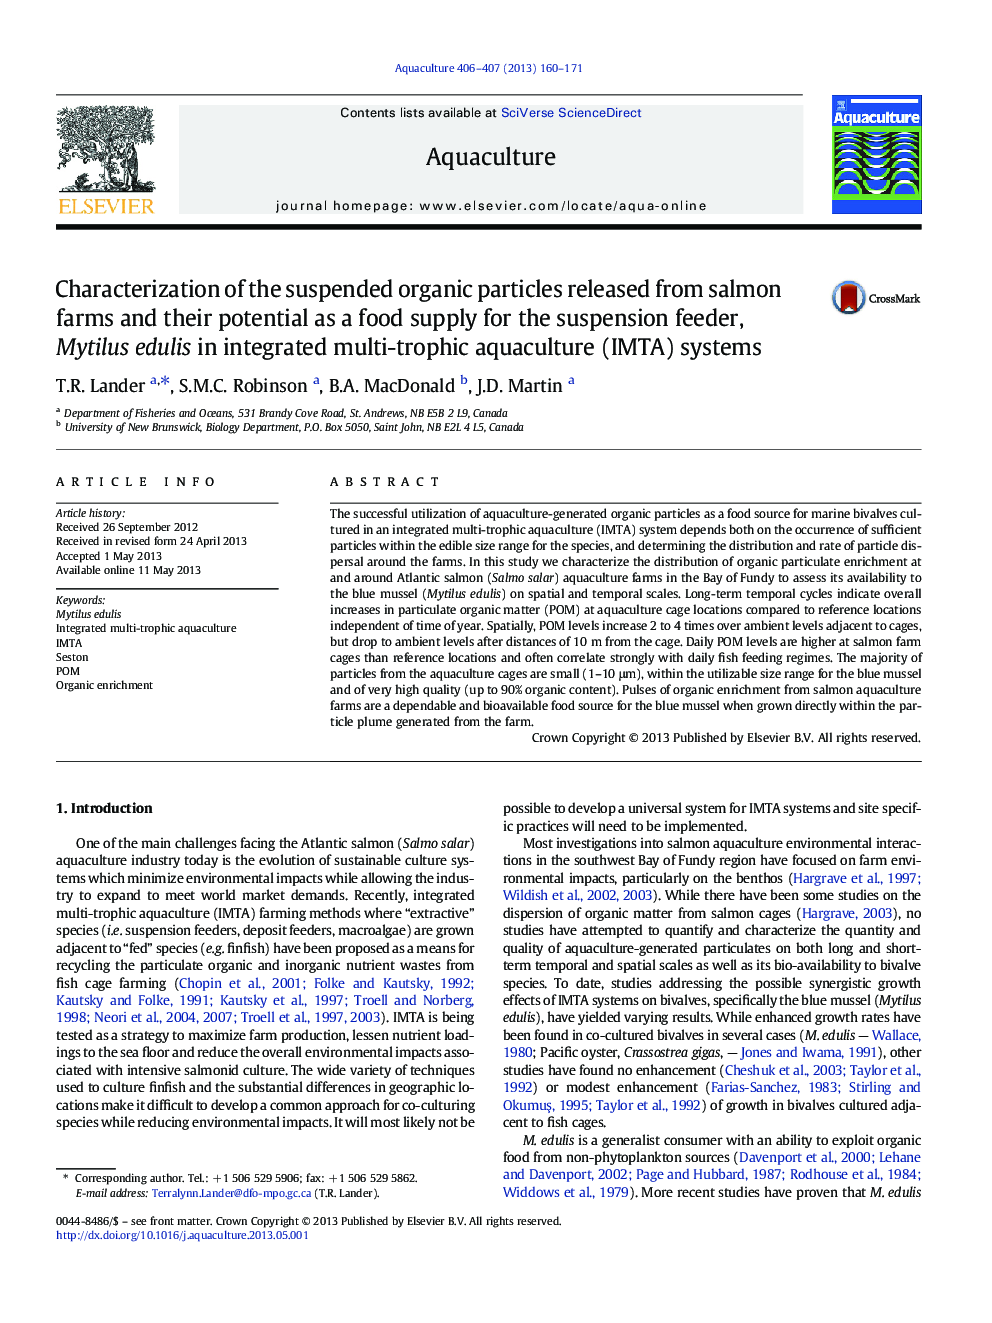 Characterization of the suspended organic particles released from salmon farms and their potential as a food supply for the suspension feeder, Mytilus edulis in integrated multi-trophic aquaculture (IMTA) systems